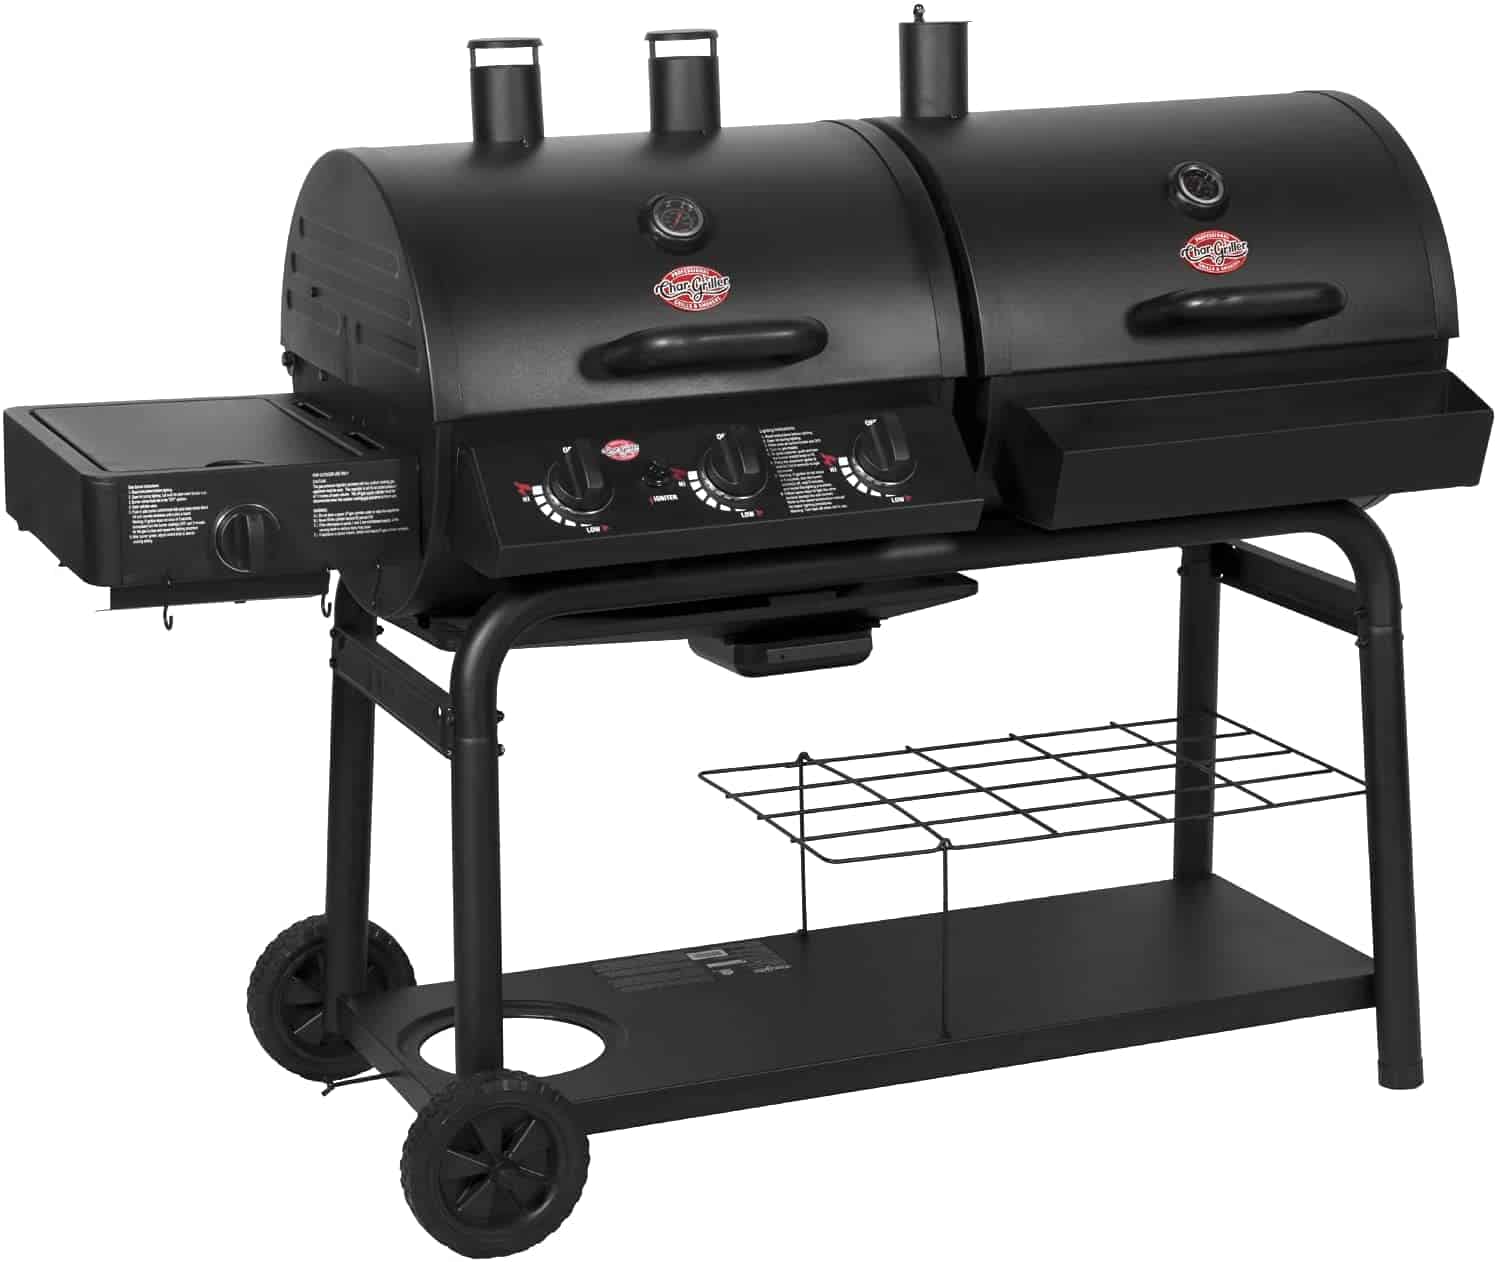 Best gas & charcoal combo grill overall- Char-Griller 5050 Duo